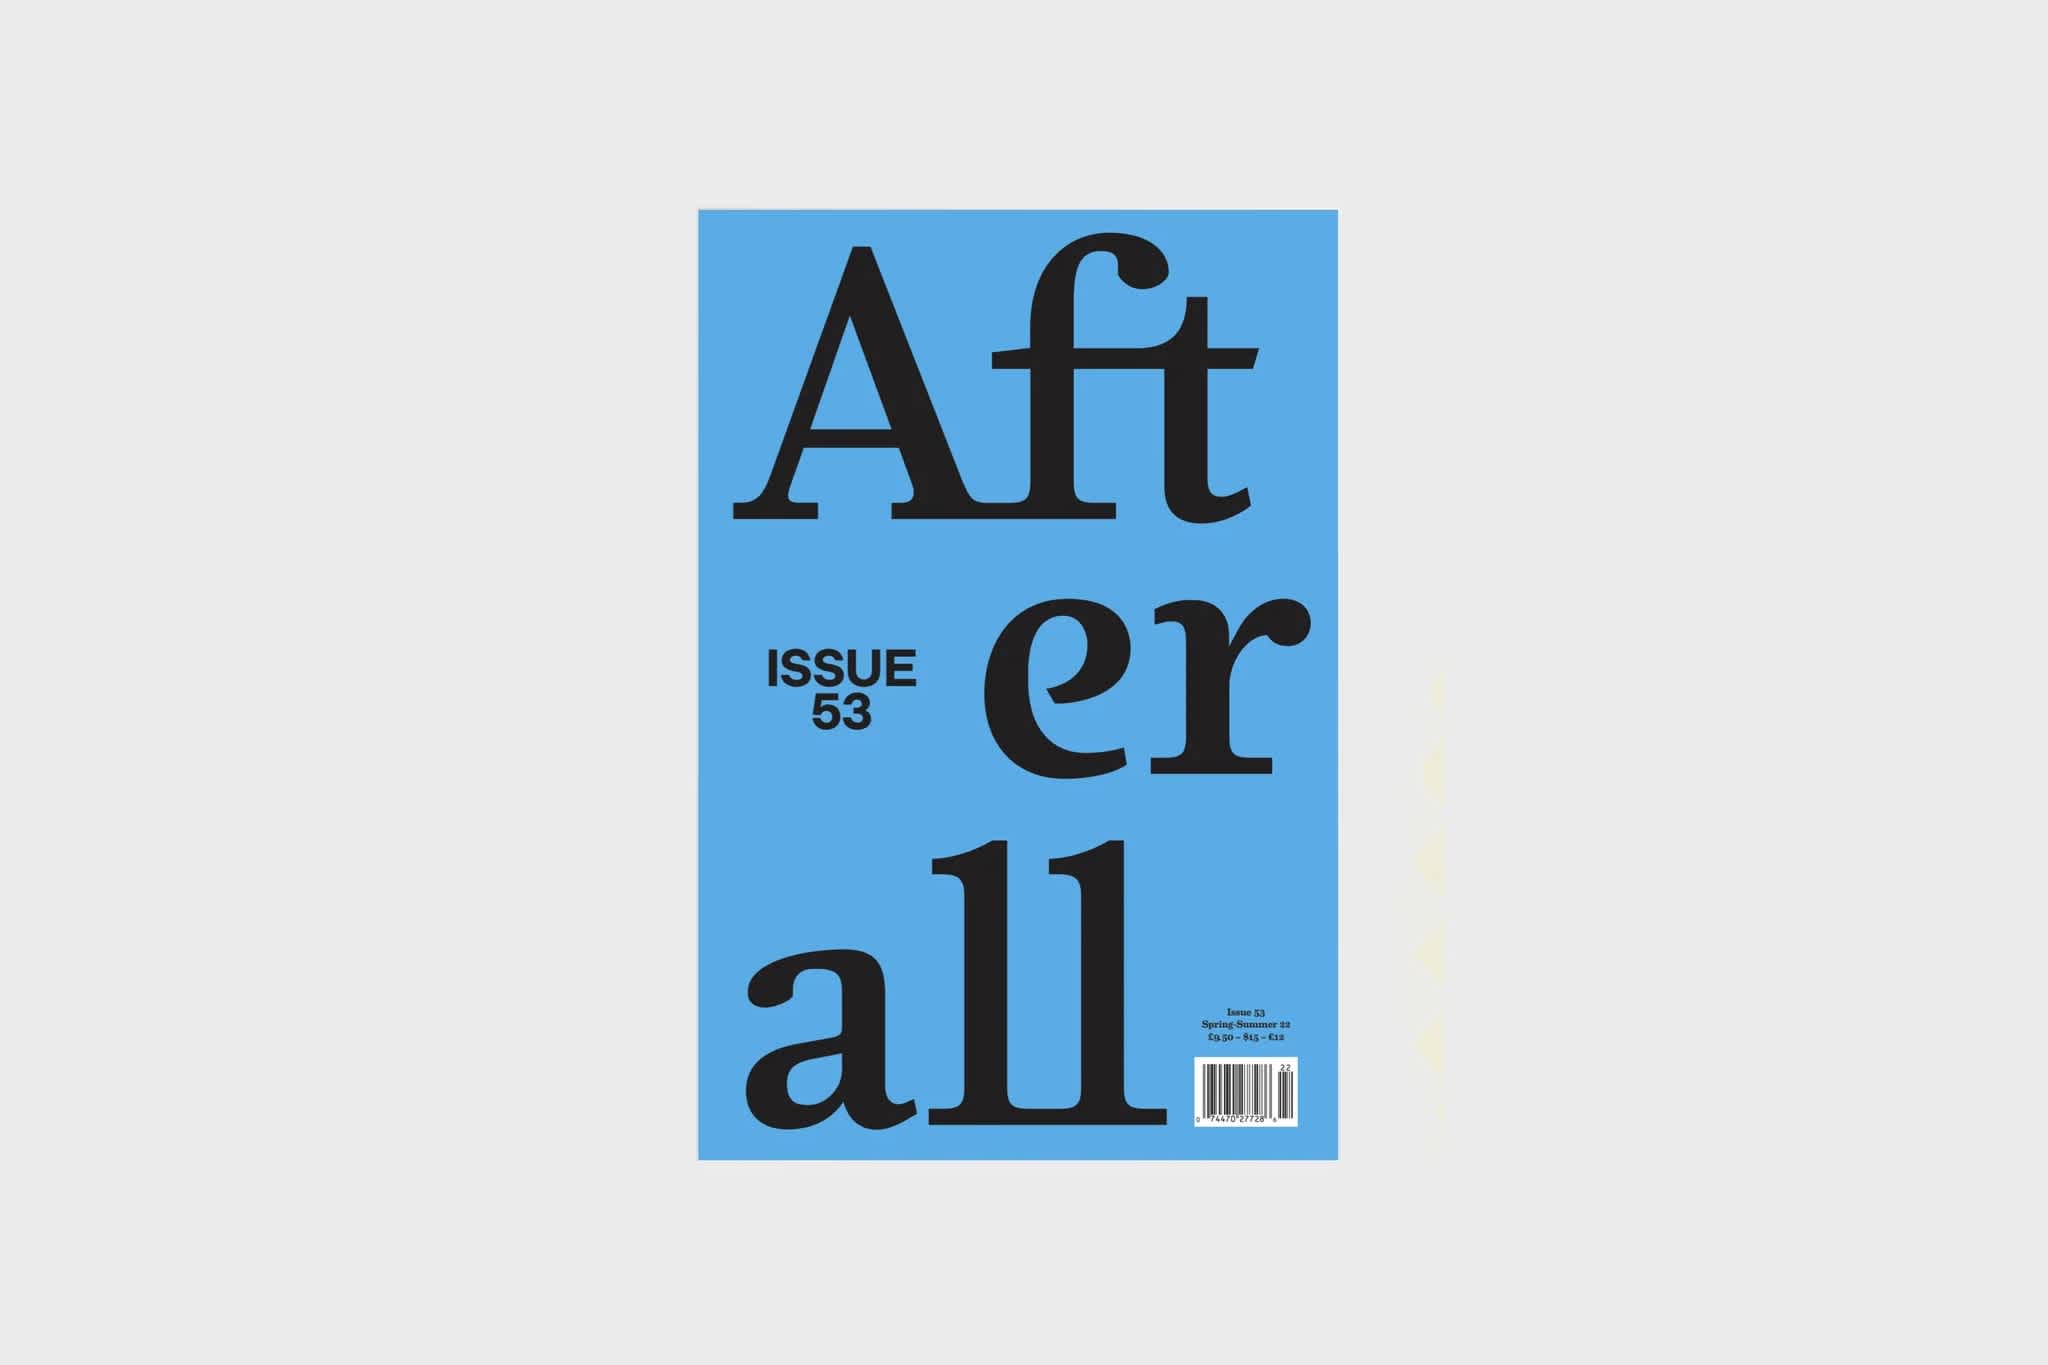 Light blue magazine cover with title, "Afterall" in black letters. The text "Issue 52" is printed in black on the left side. 